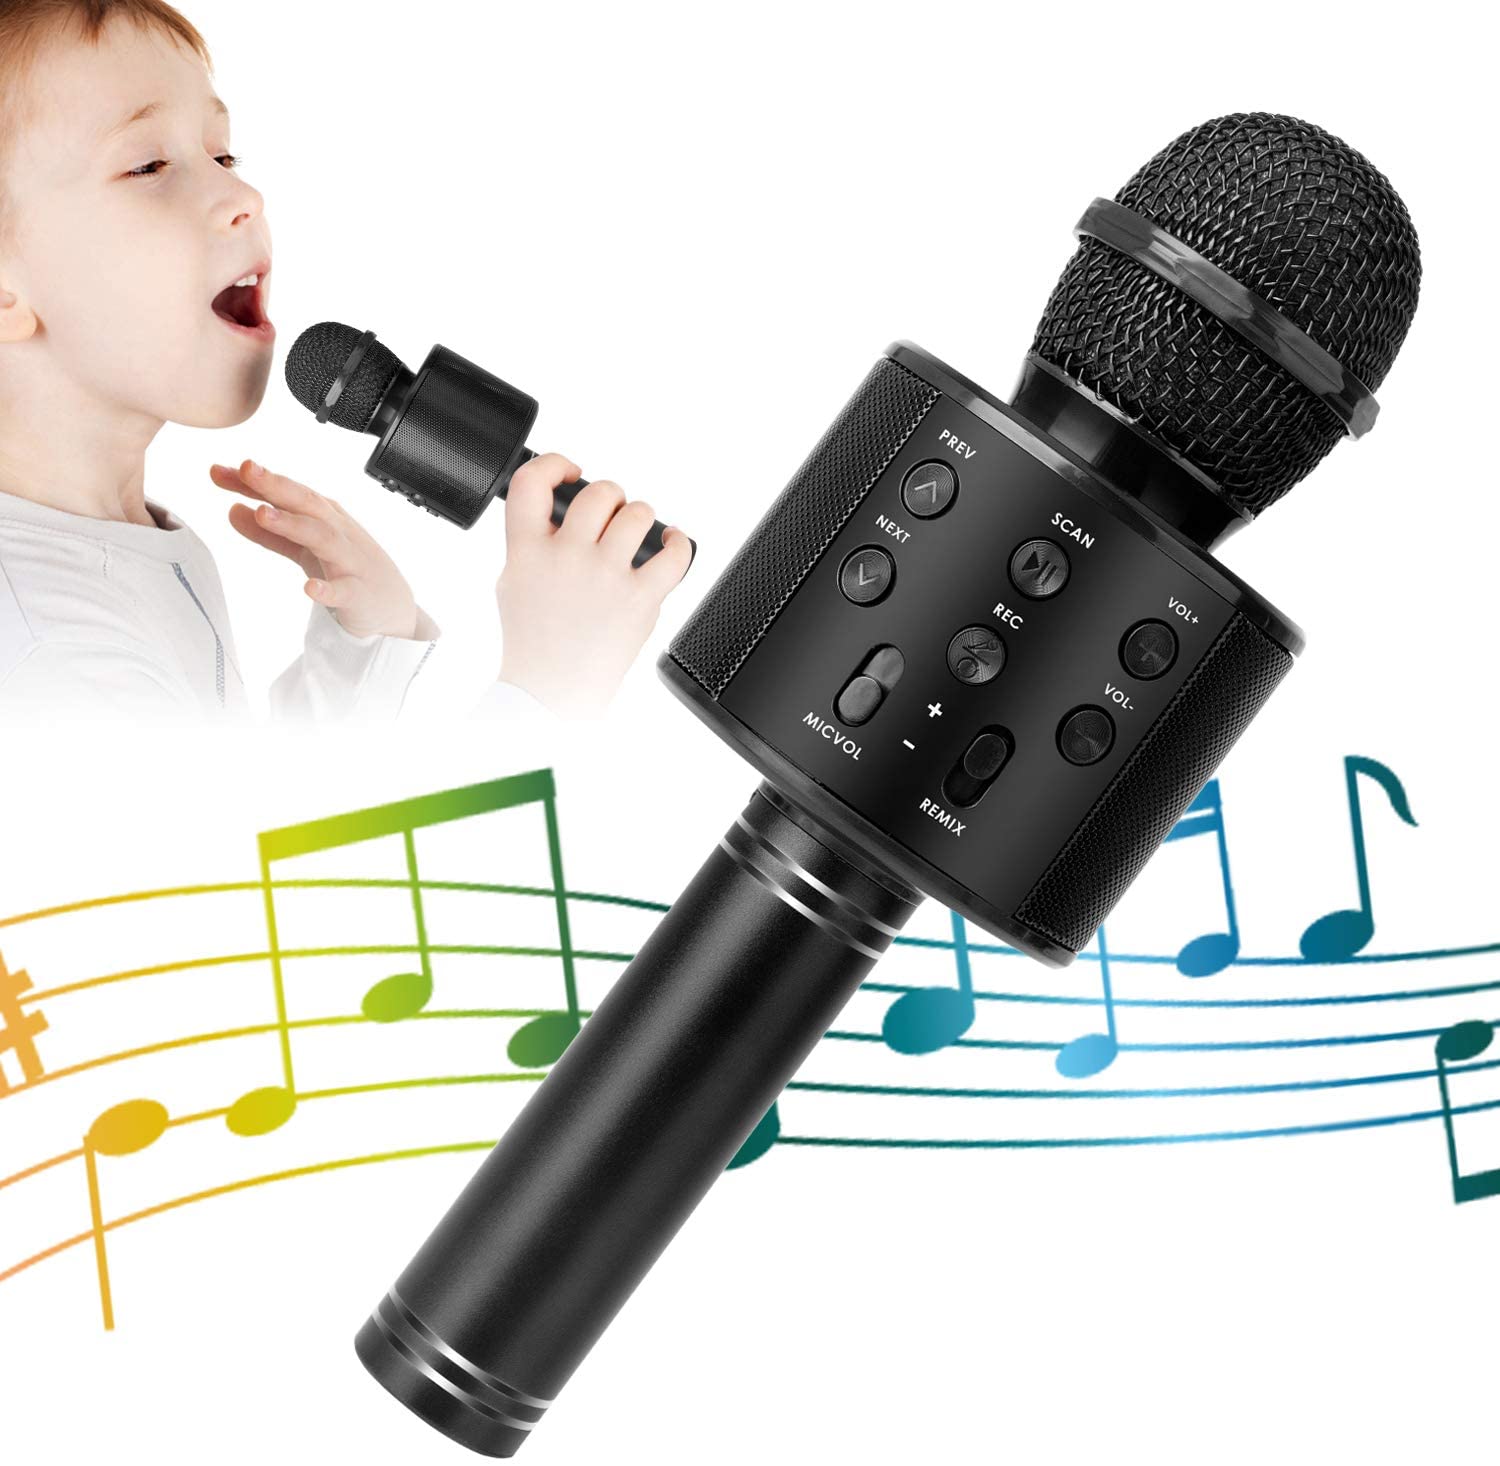 Wireless Karaoke Microphone for Singing Bluetooth Microphone Child Echo Karaoke Mic Machine Cordless with Speaker for Boys Girls Adult Party Music Gift Android iOS Phones Silver Microphone for Kids 